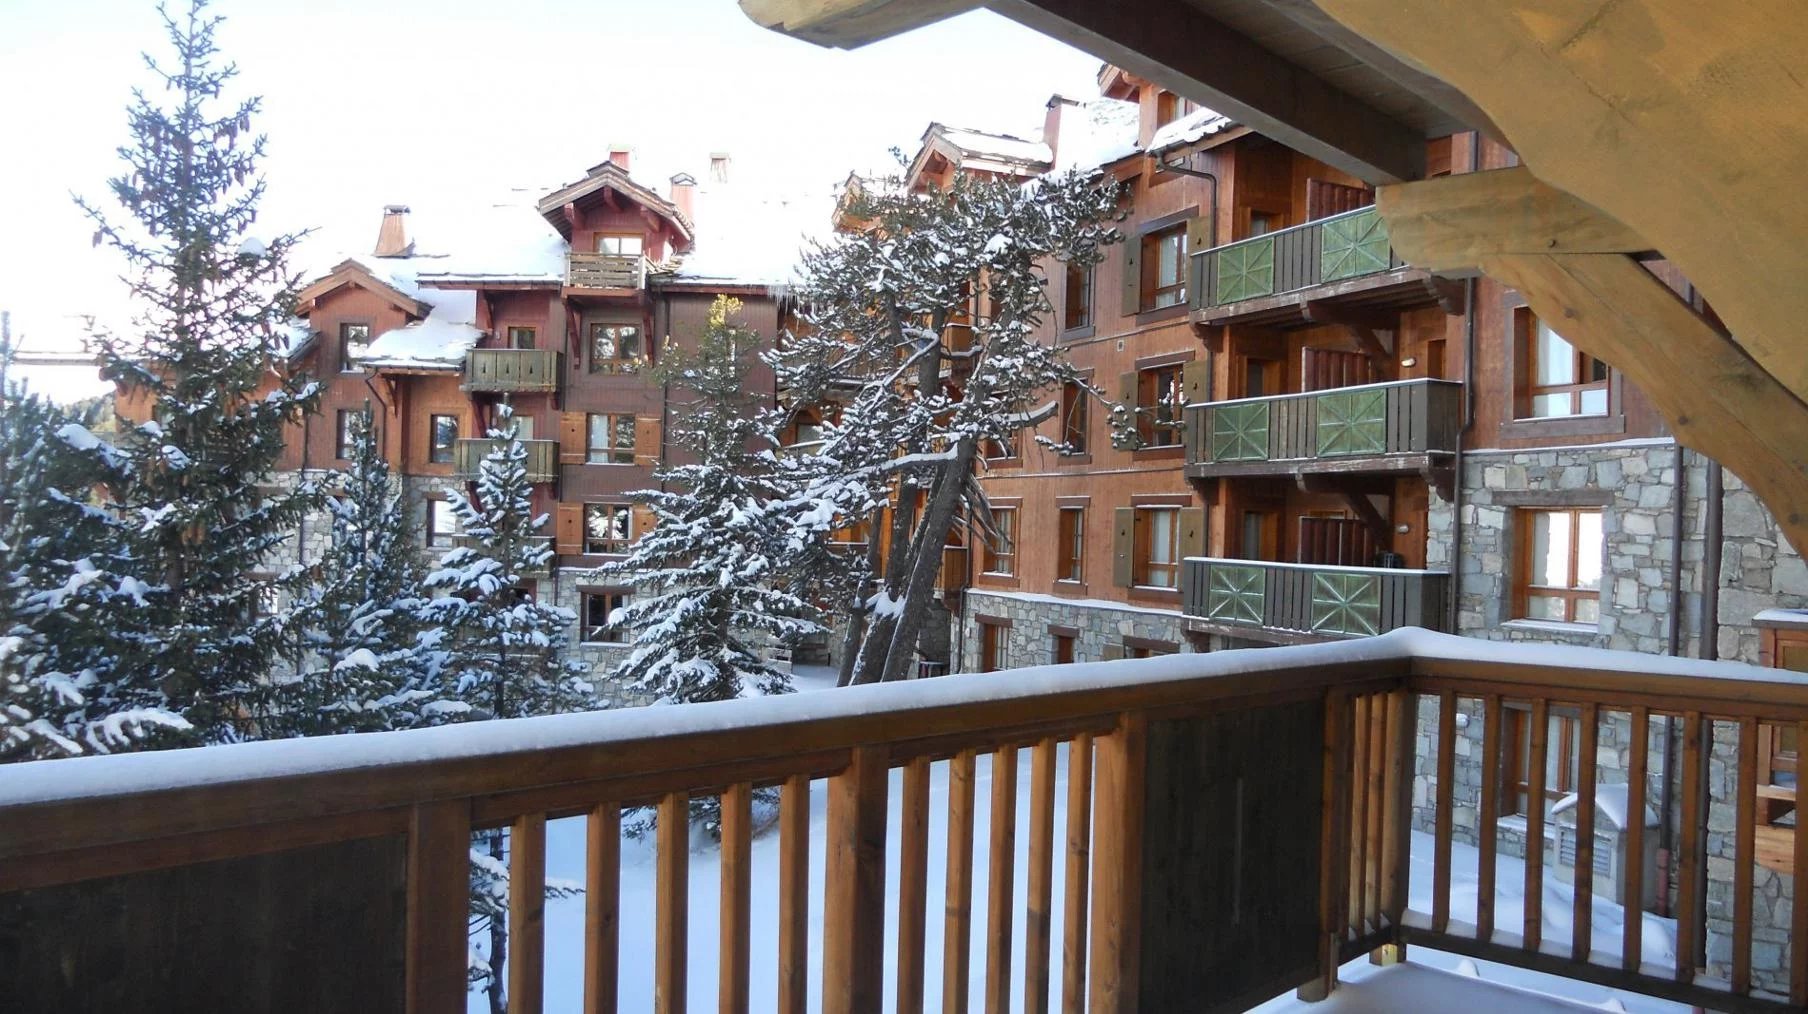 Holiday rental: Beautiful Ski-in Ski-out 3 bed apartment.